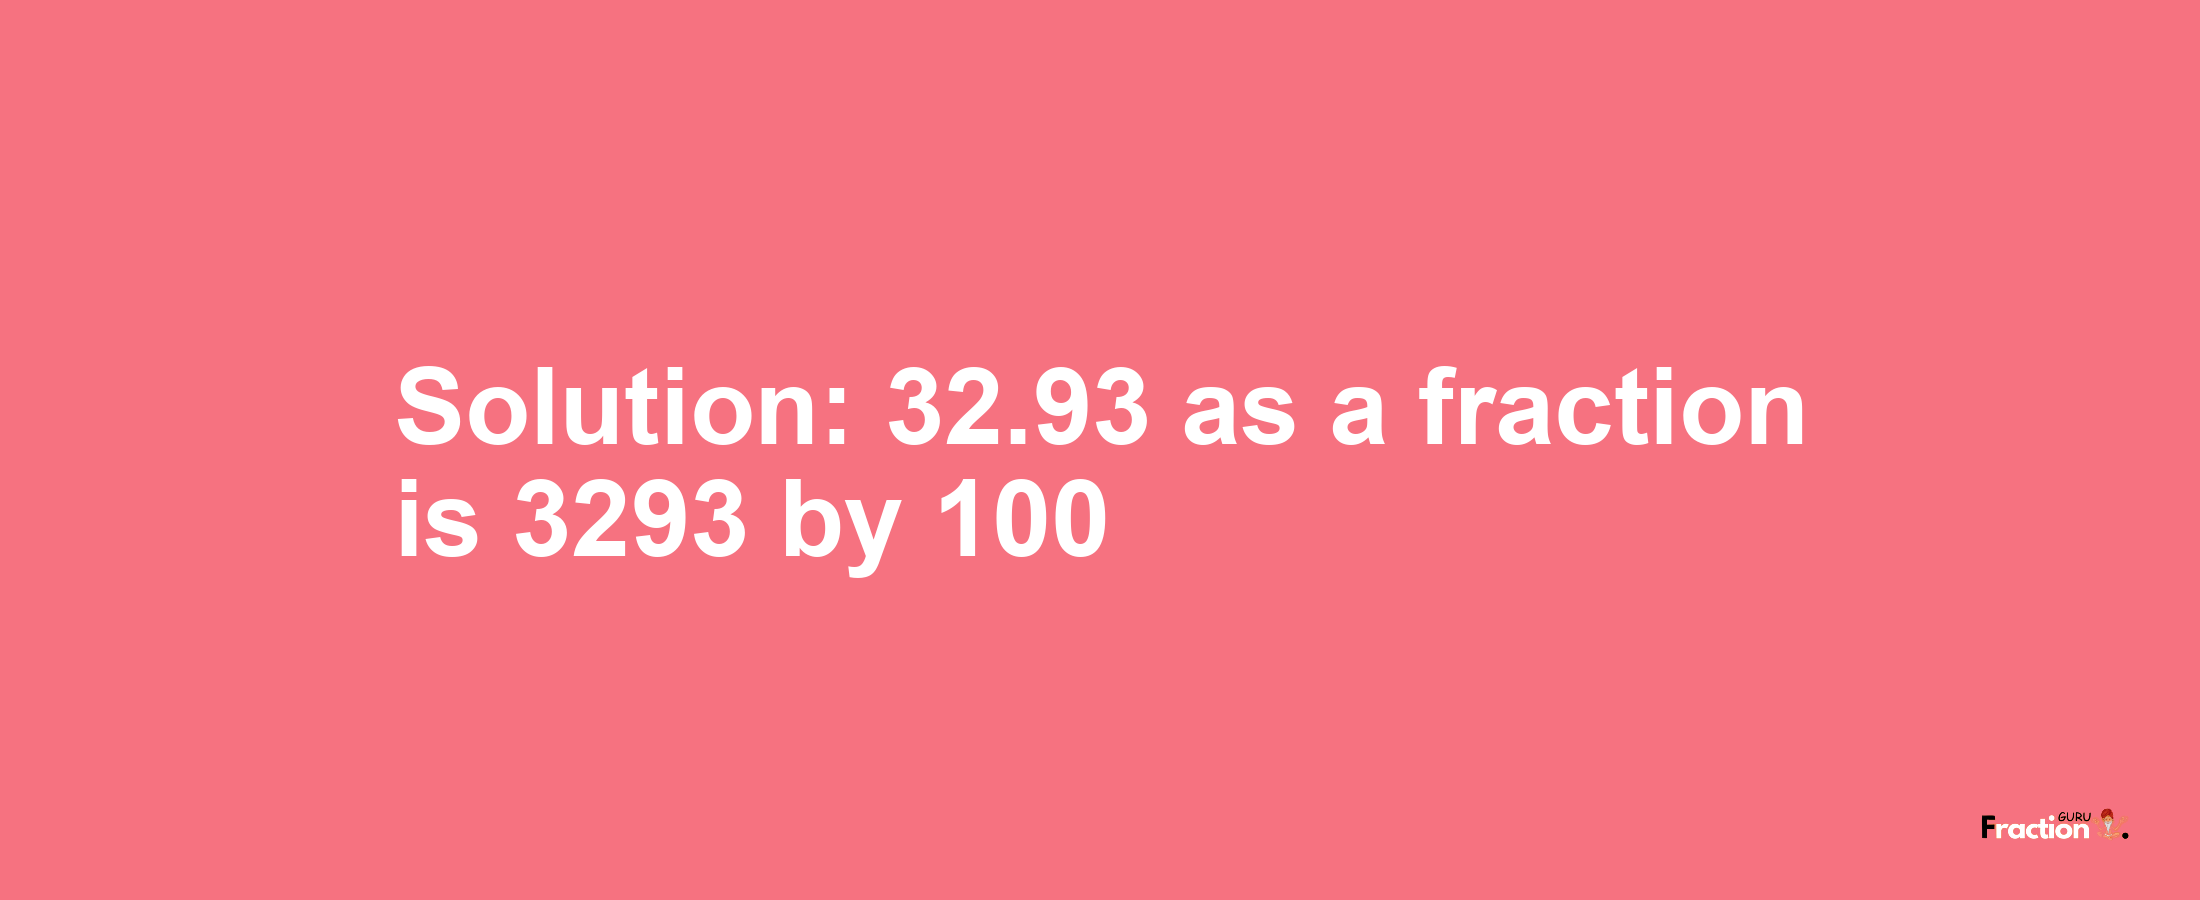 Solution:32.93 as a fraction is 3293/100